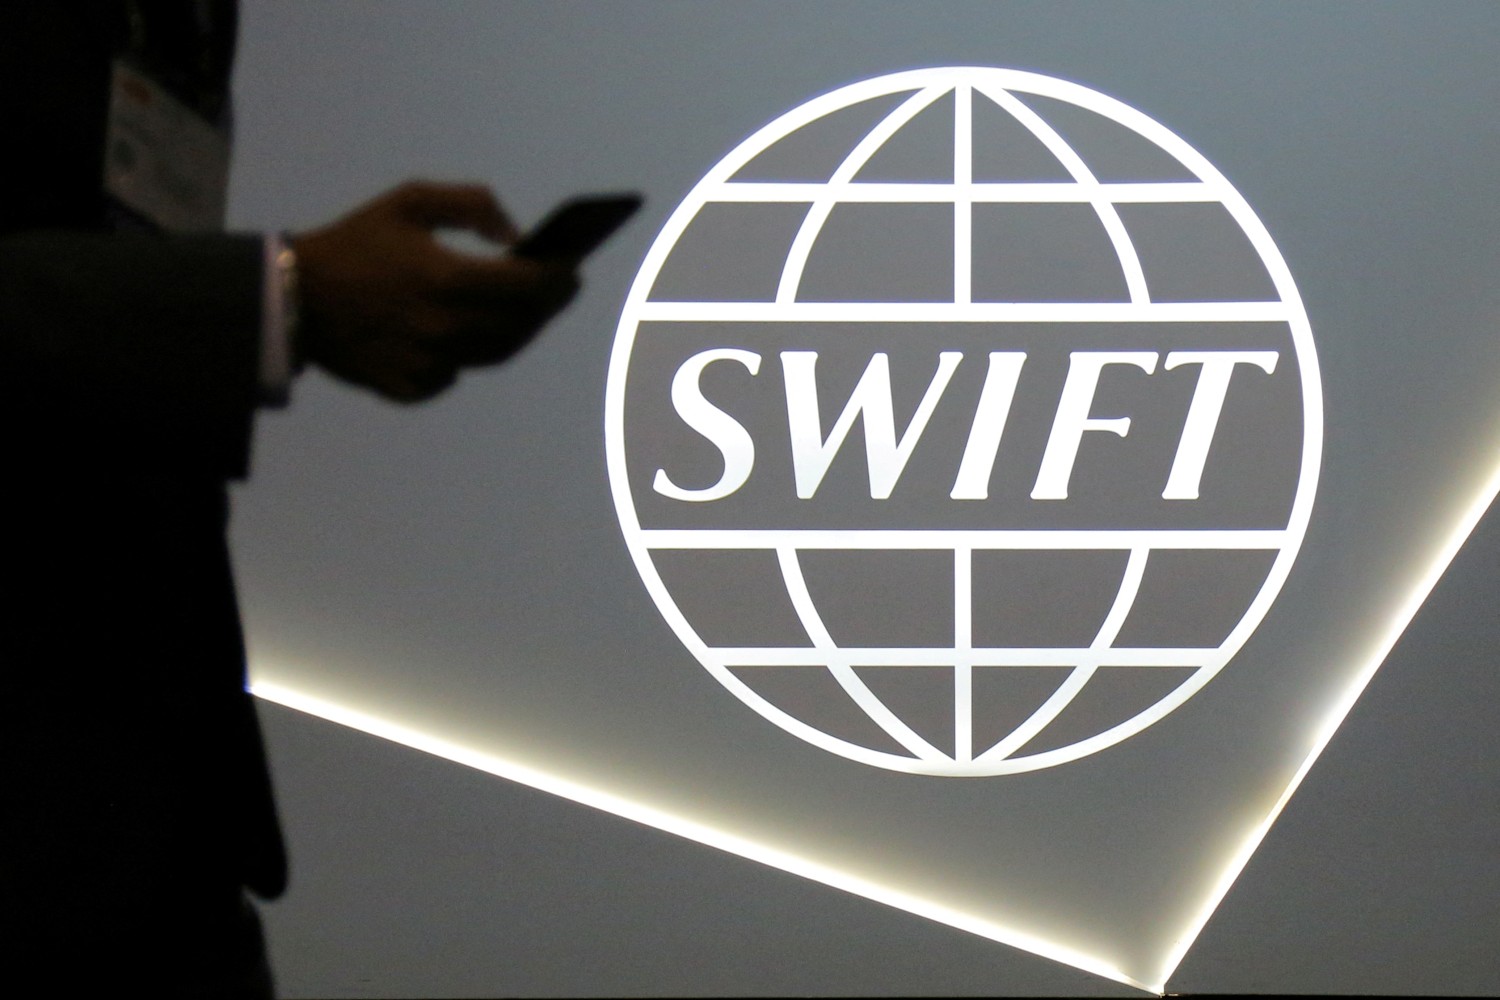  FILE PHOTO: A man using a mobile phone passes the logo of global secure financial messaging services cooperative SWIFT at the SIBOS banking and financial conference in Toronto, Ontario, Canada October 19, 2017. Reuters/Chris Helgren/File Photo